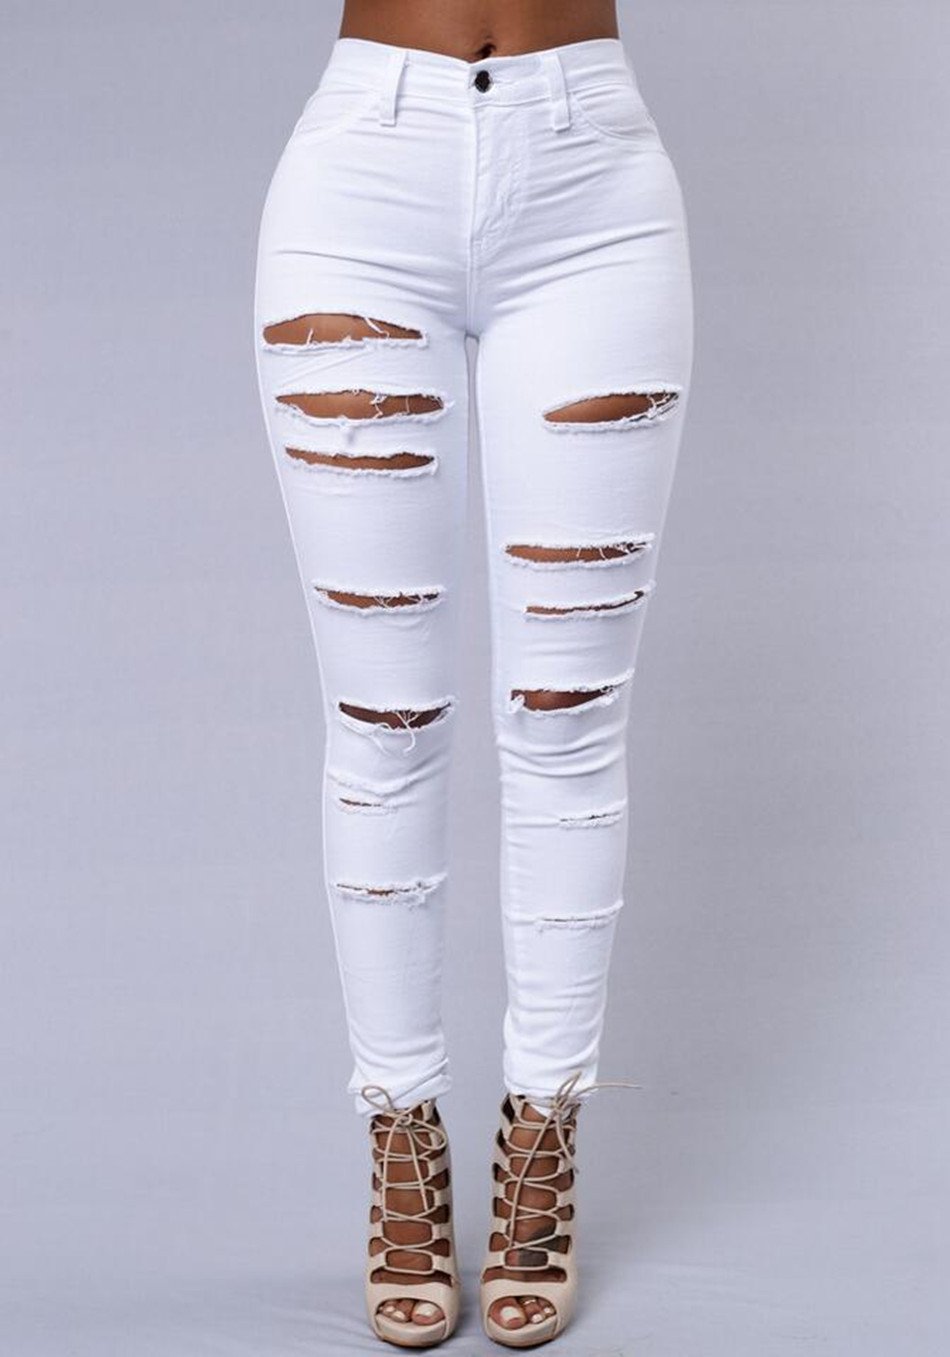 Beggar Ripped Street Straight Elastic Slim Plus Size Jeans - Meet Yours Fashion - 1